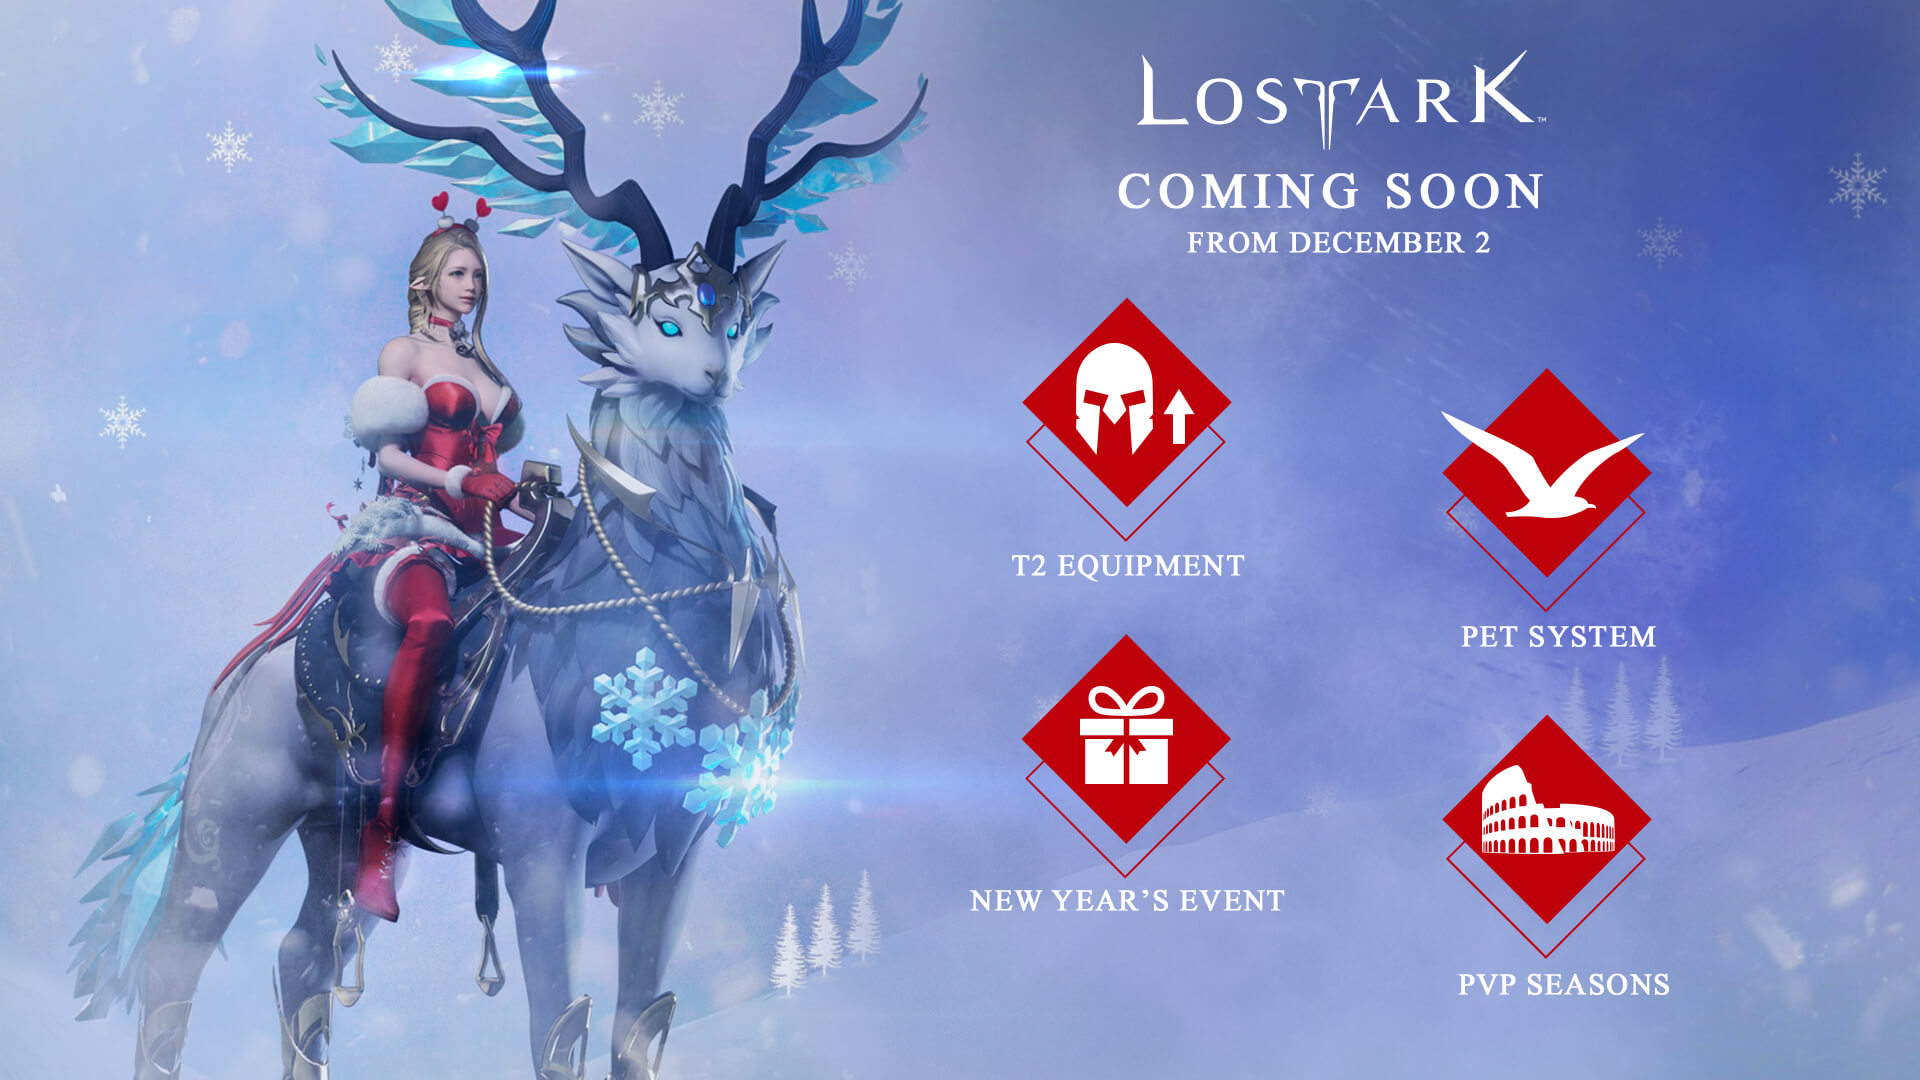 [RU] Lost Ark Russia - December Updates - Pet system, Elite Cube, Tower of Fate, PvP Seasons & more